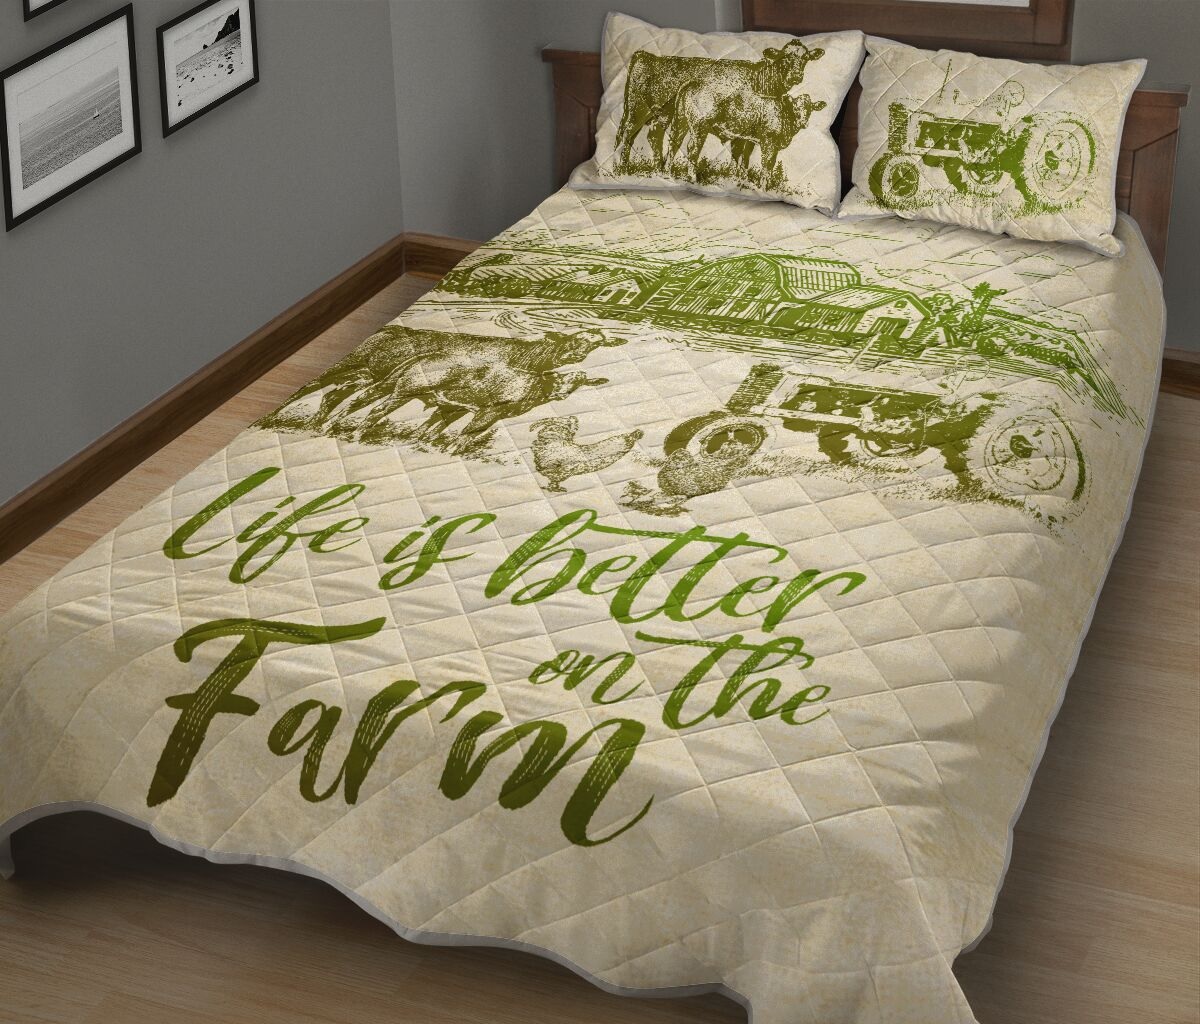 Cows life is better on the farm quilt 1